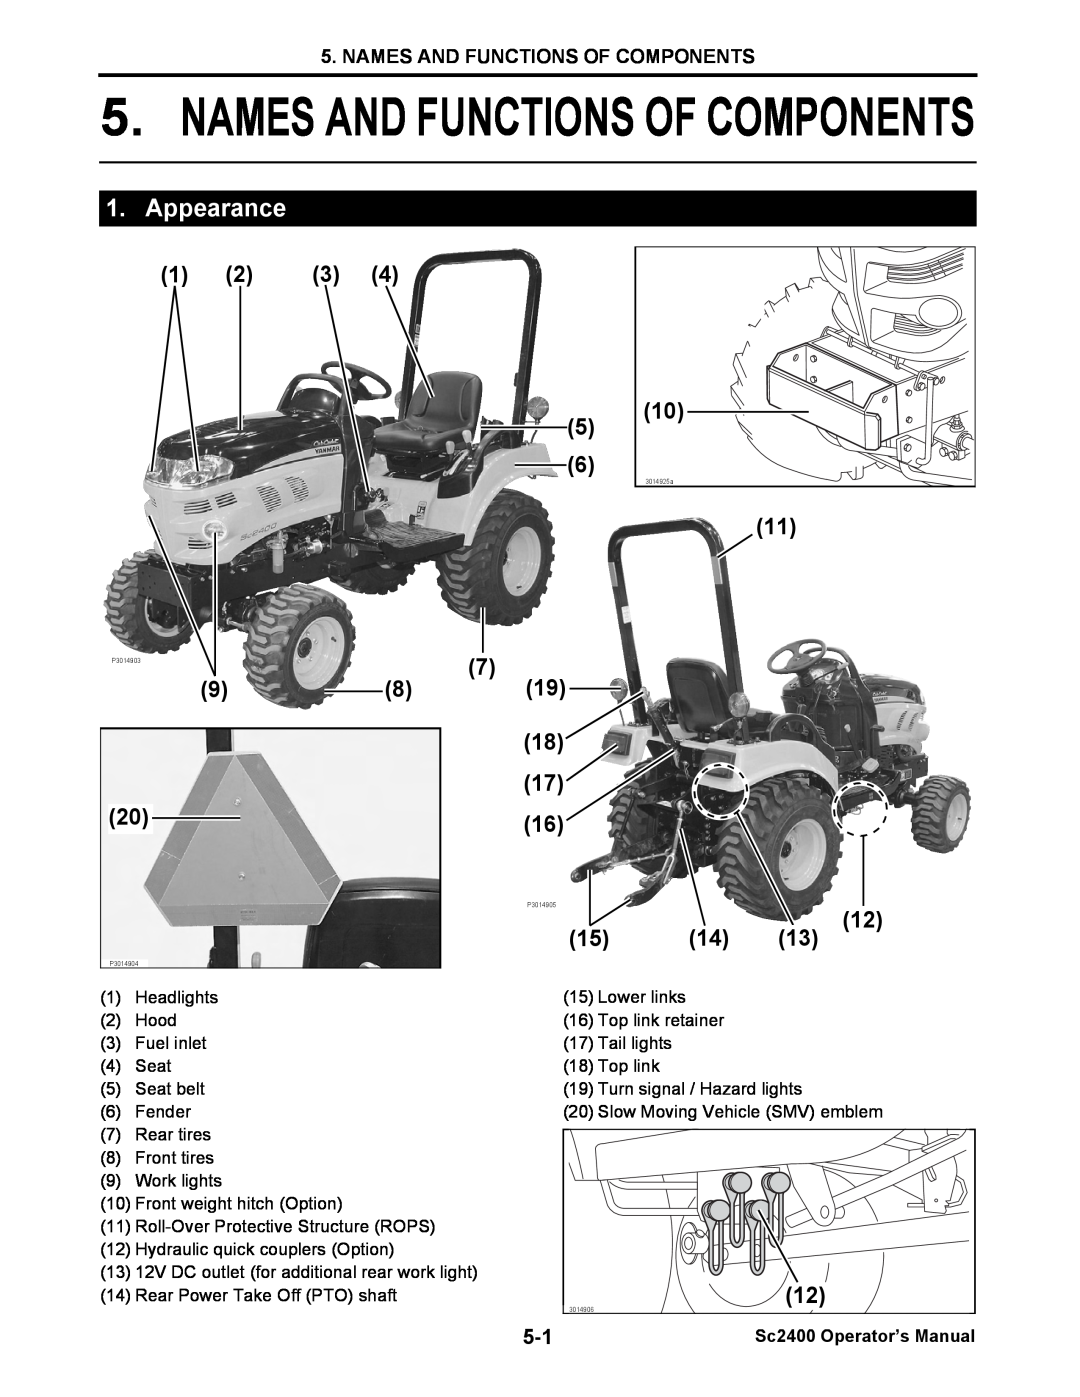 Cub Cadet SC2400 manual Appearance, 98 20, 19 18 17, Names And Functions Of Components 